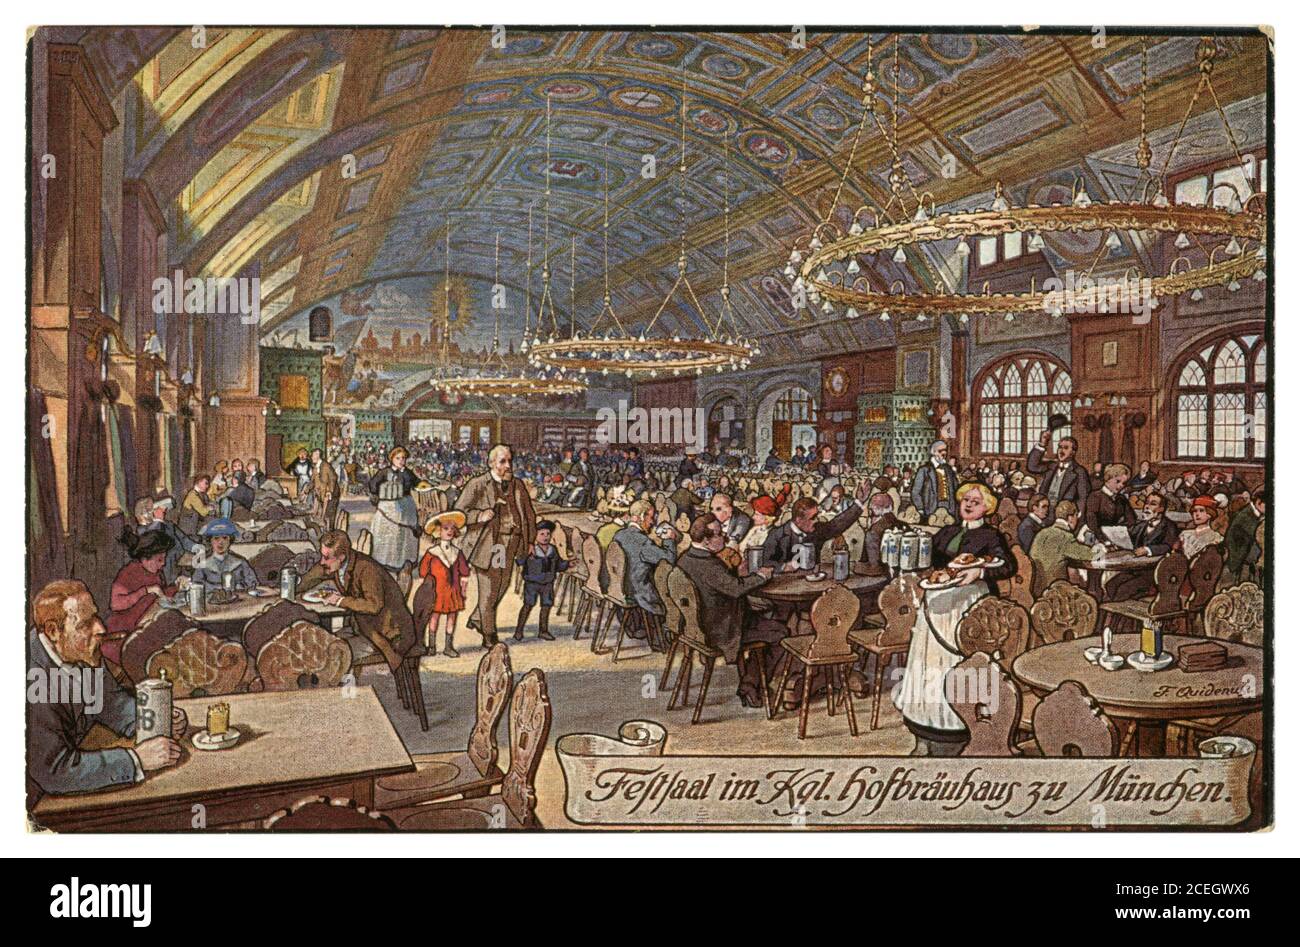 German historical postcard: Grand hall in the Hofbräuhaus beer restaurant on Platzl square in Munich, Bavaria, German Empire, early 1900s. Stock Photo